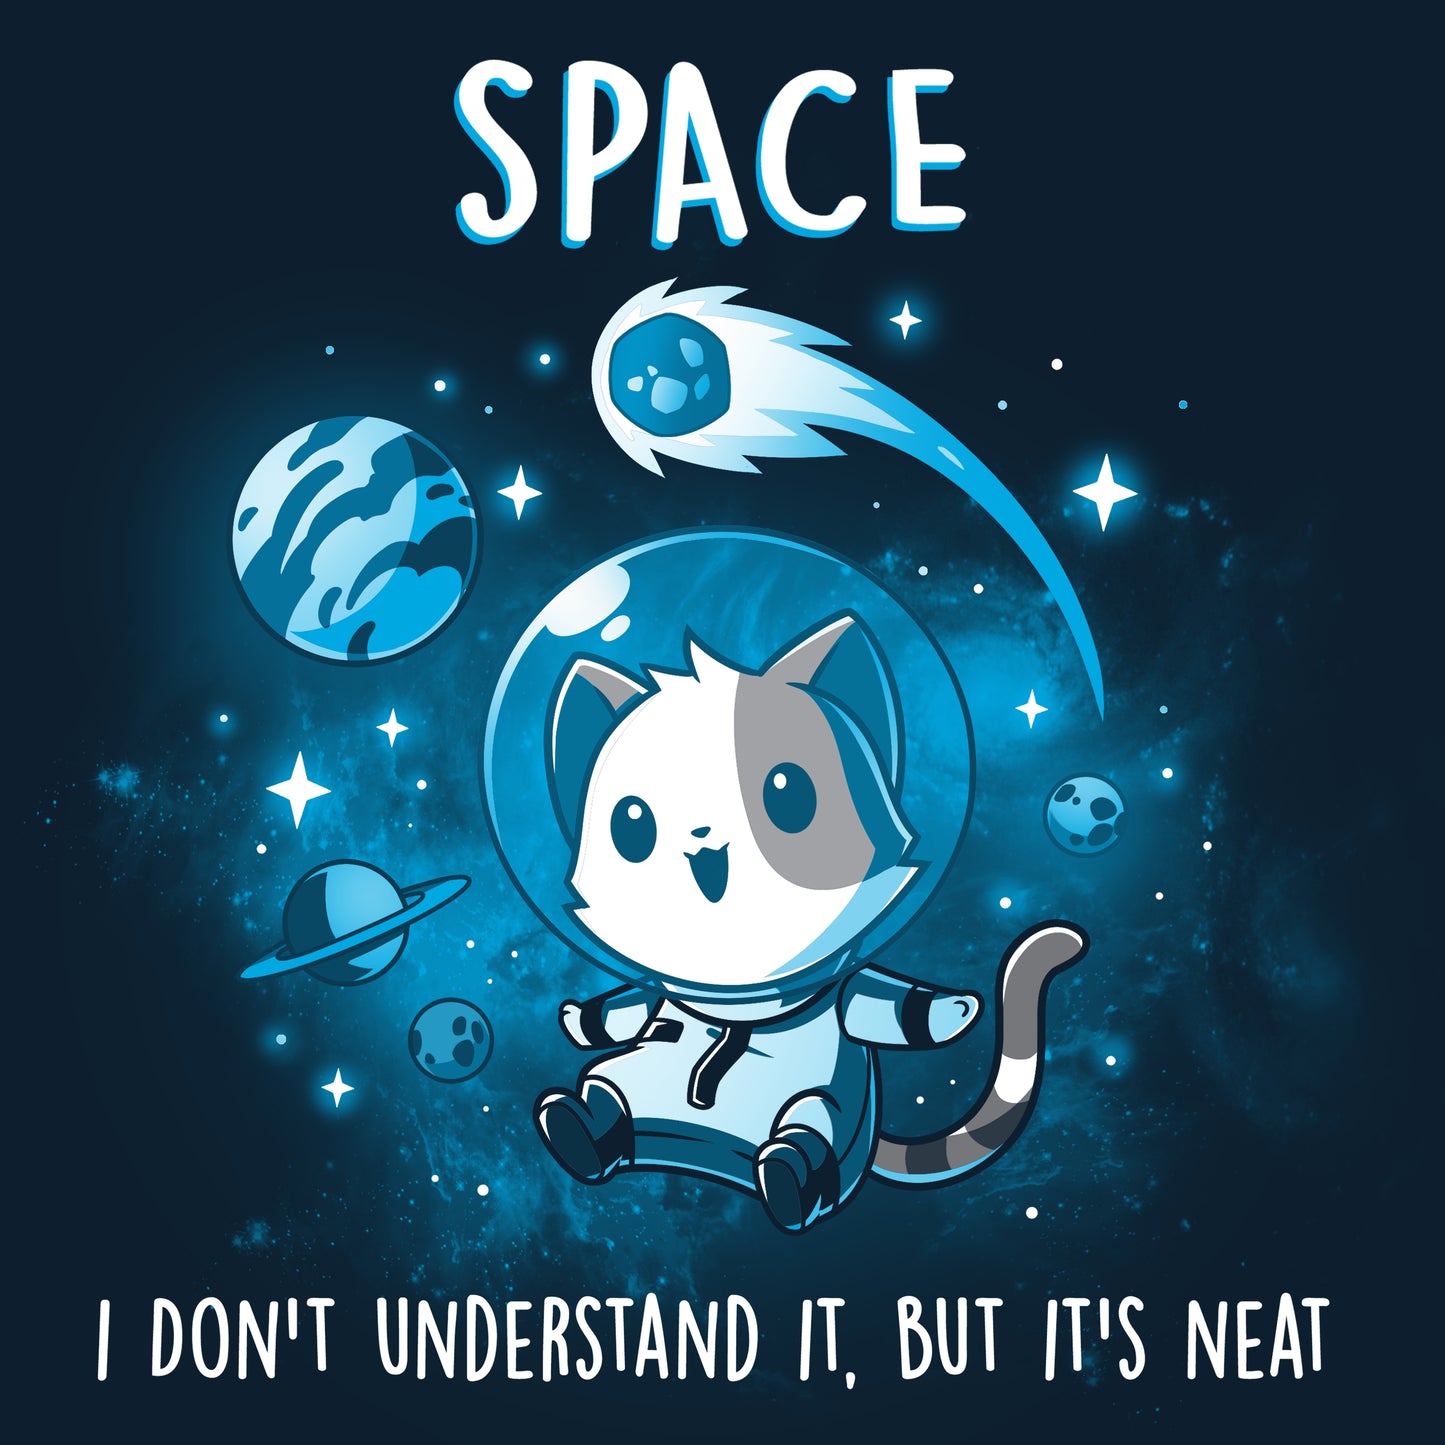 Space is a mysterious universe filled with floating rocks and balls of hot gas. The Space is Neat by TeeTurtle.